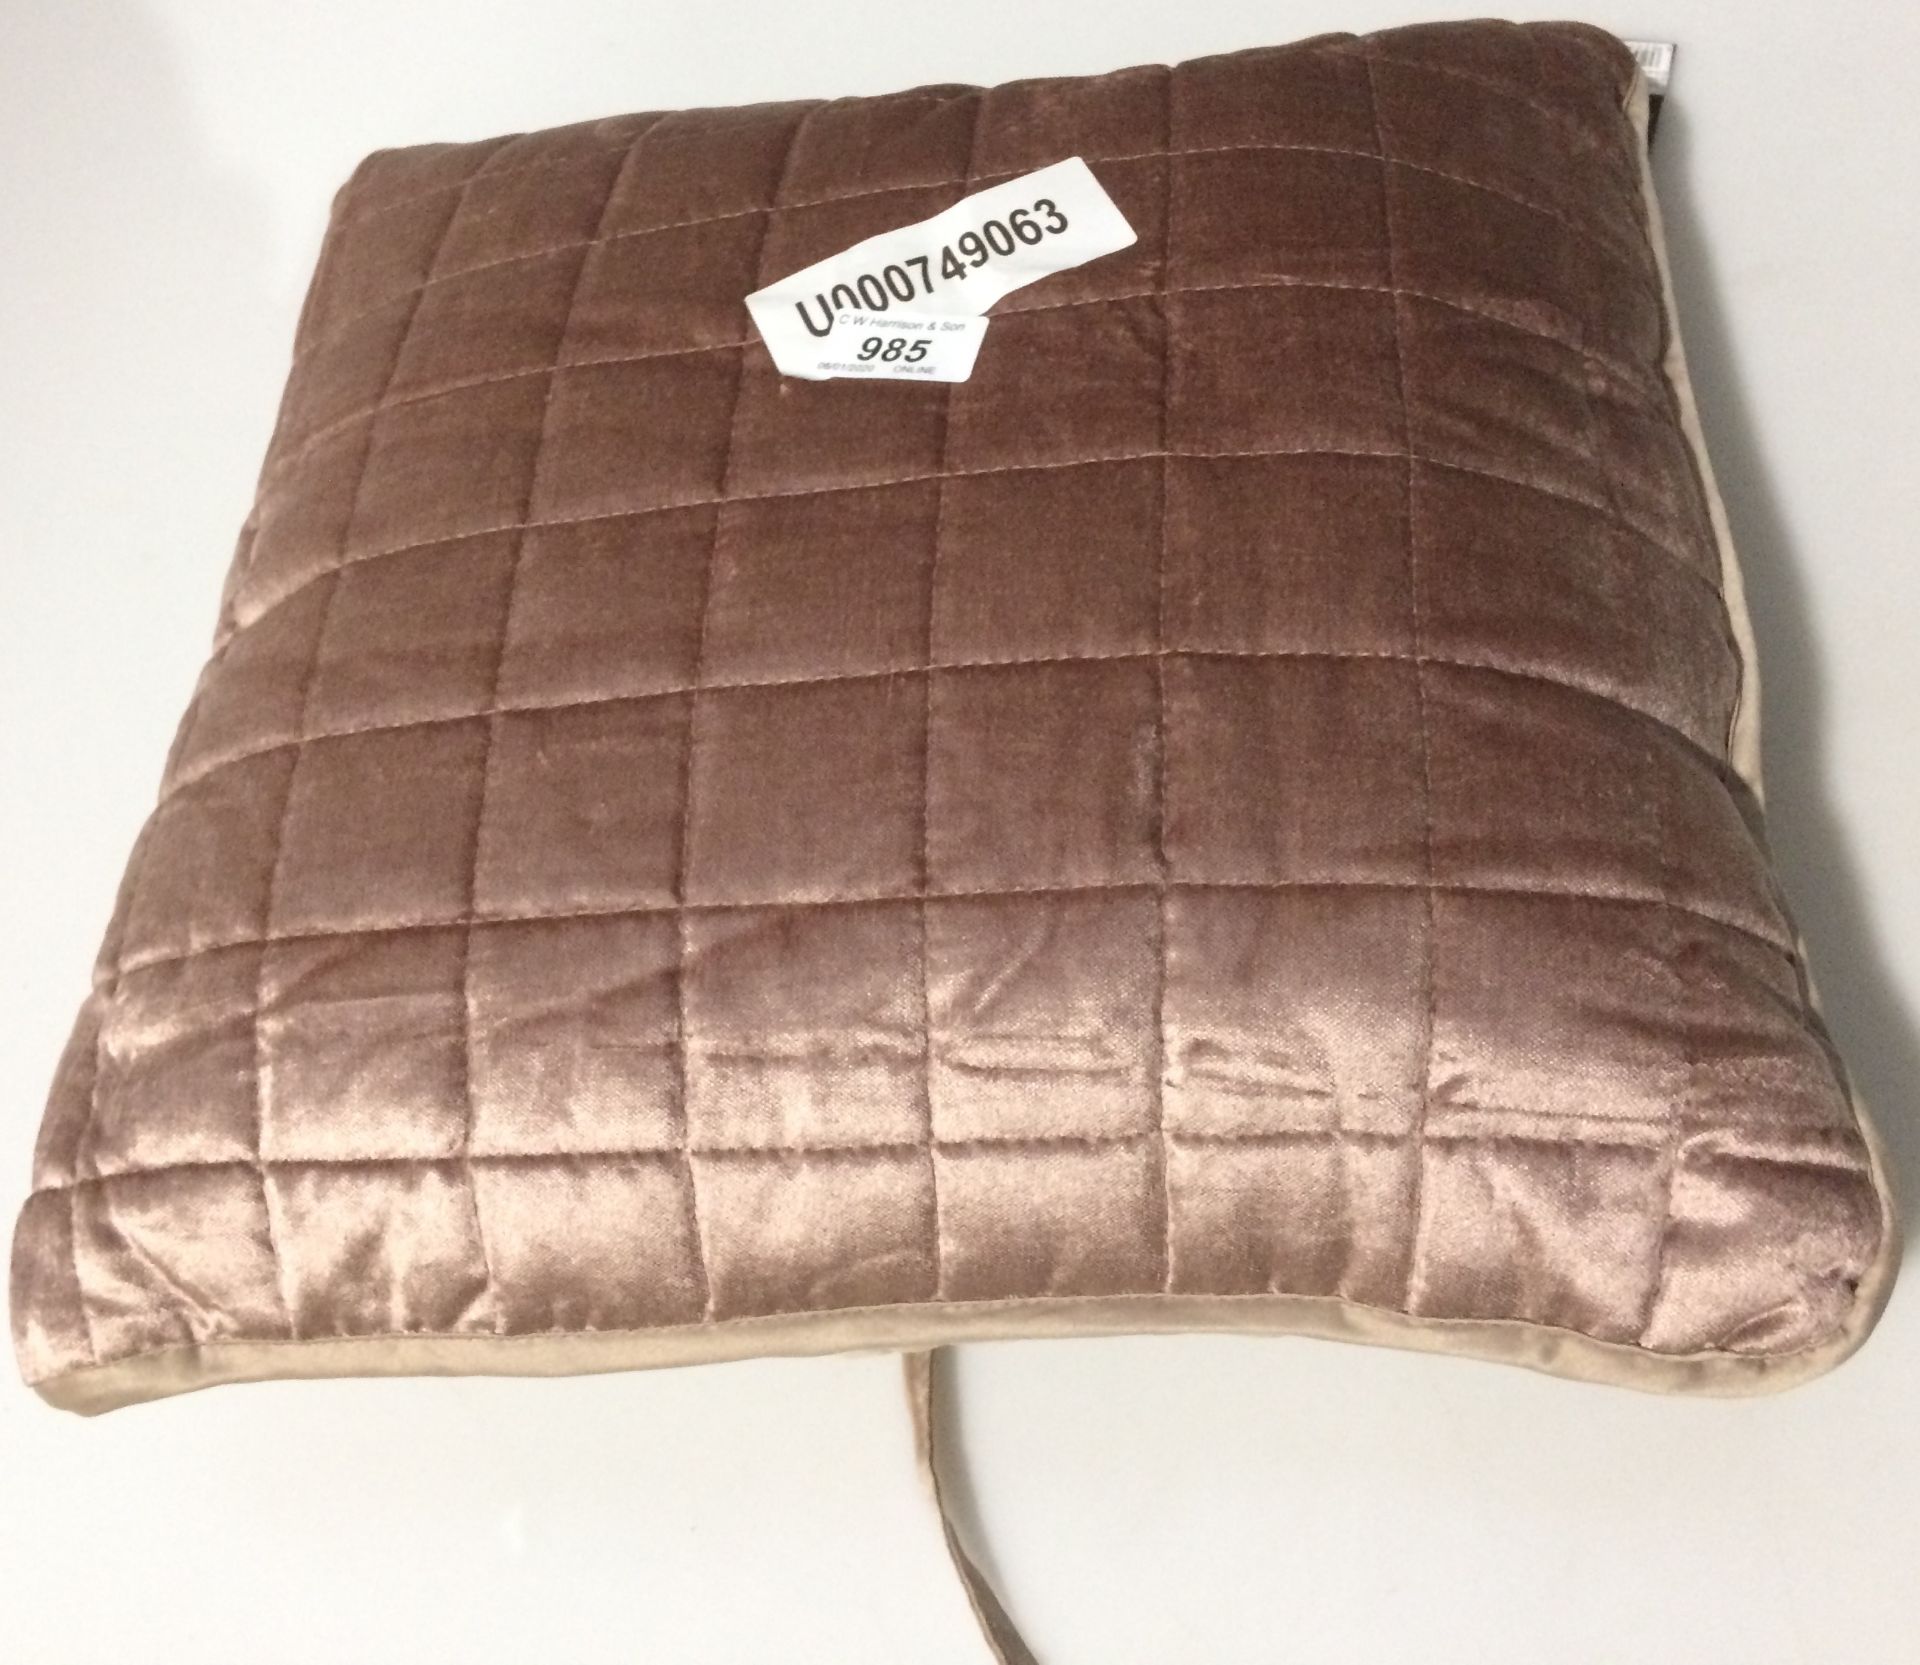 Mccants Quilted Cushion Cover by Brayden Studio - Image 2 of 2